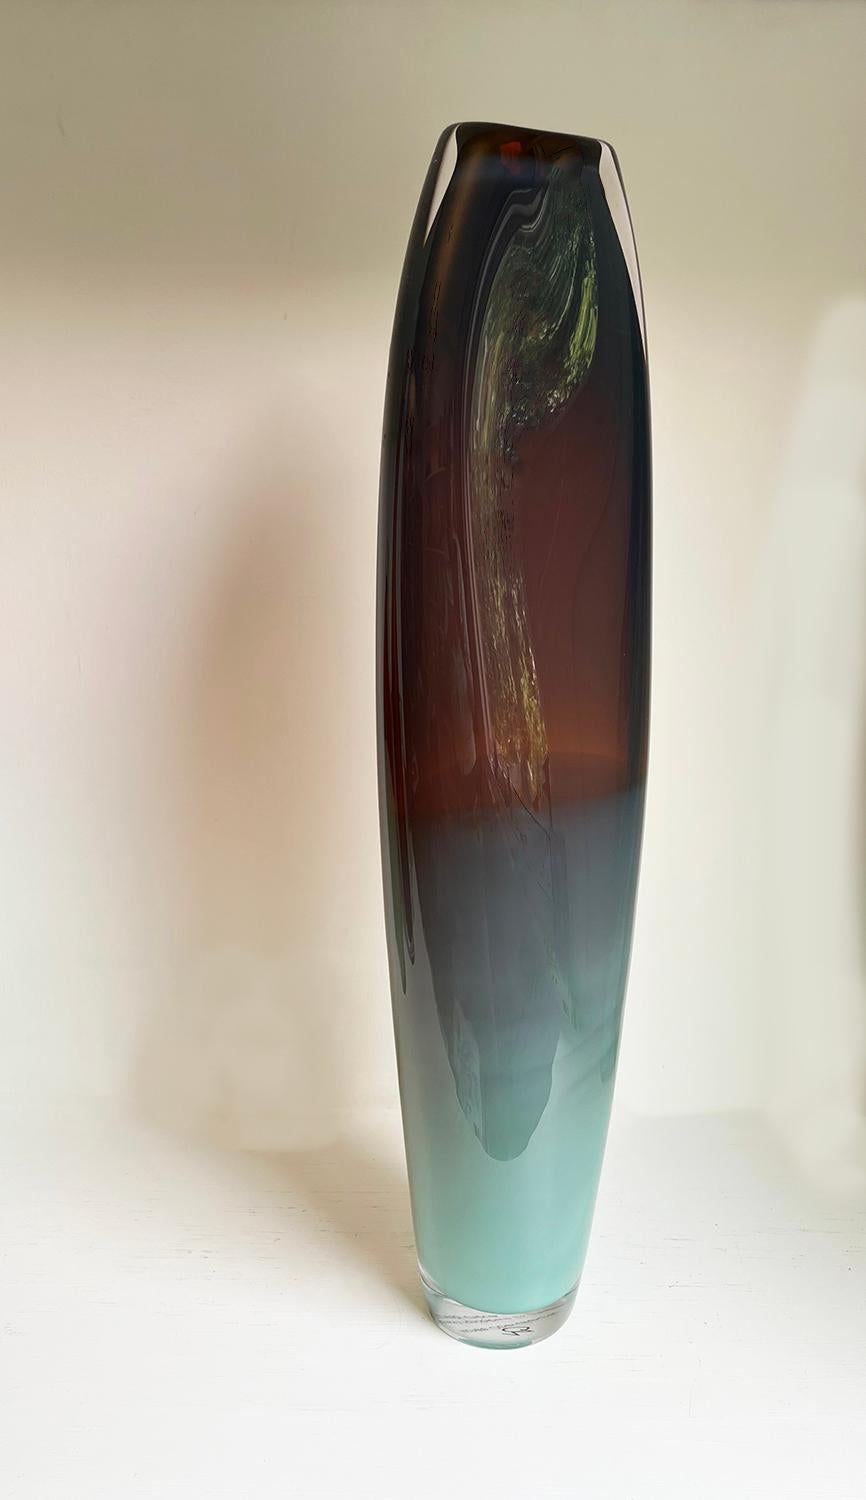 'Sierra Refractions' available as a single vessel or a group of four. 
An edition of only 4 unique vessels ranging from heights of 56-60cm.

These long limbed glass vessels are inspired by the tonality and luminosity of colour found in the layers of